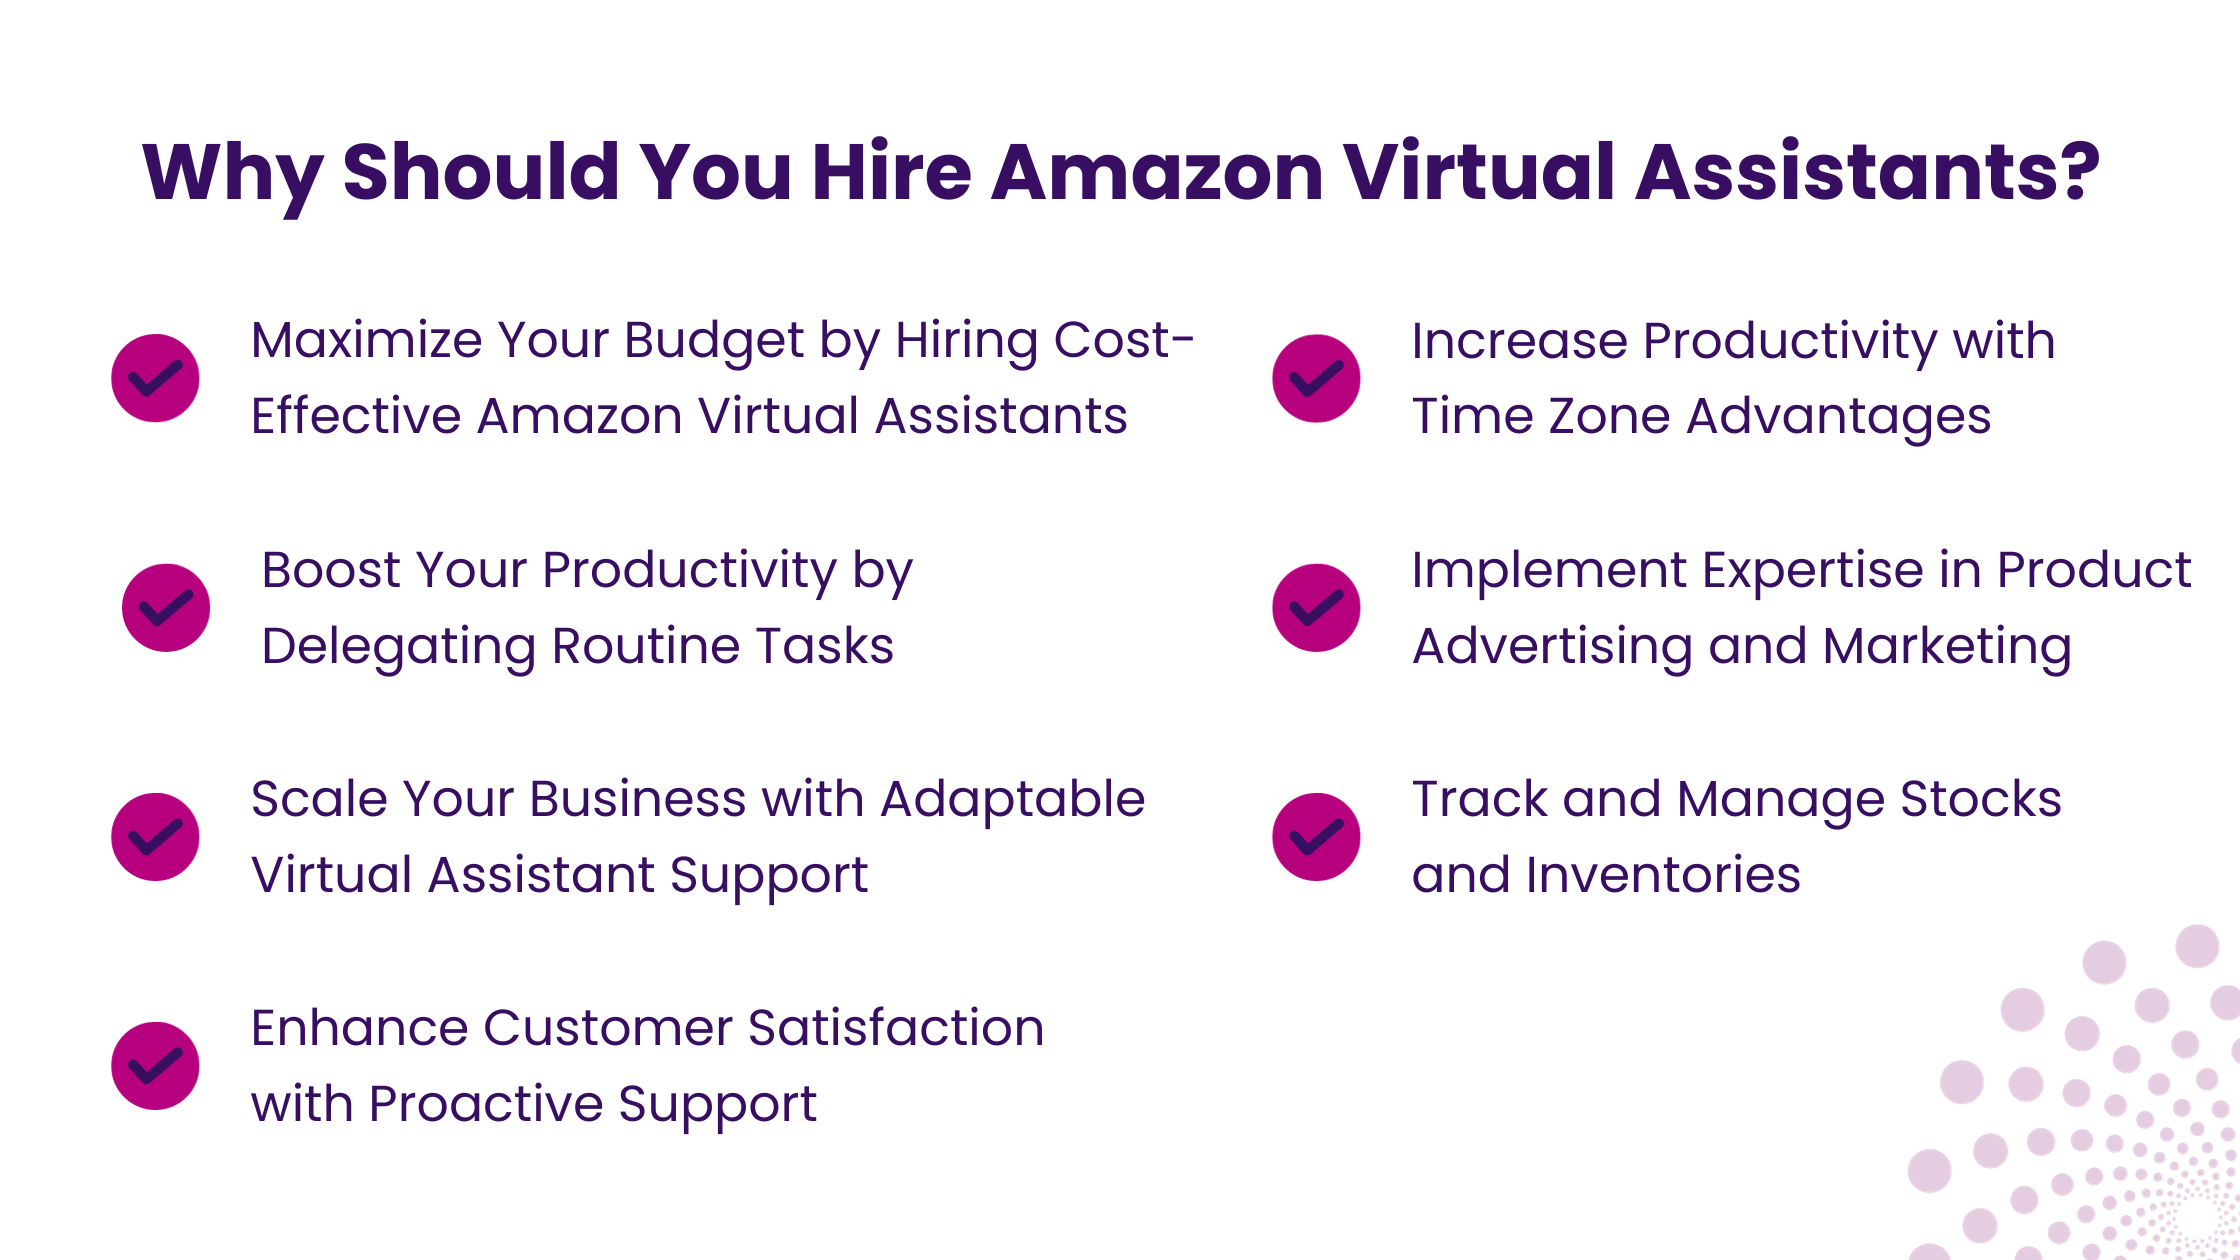 Why Should You Hire Amazon Virtual Assistants